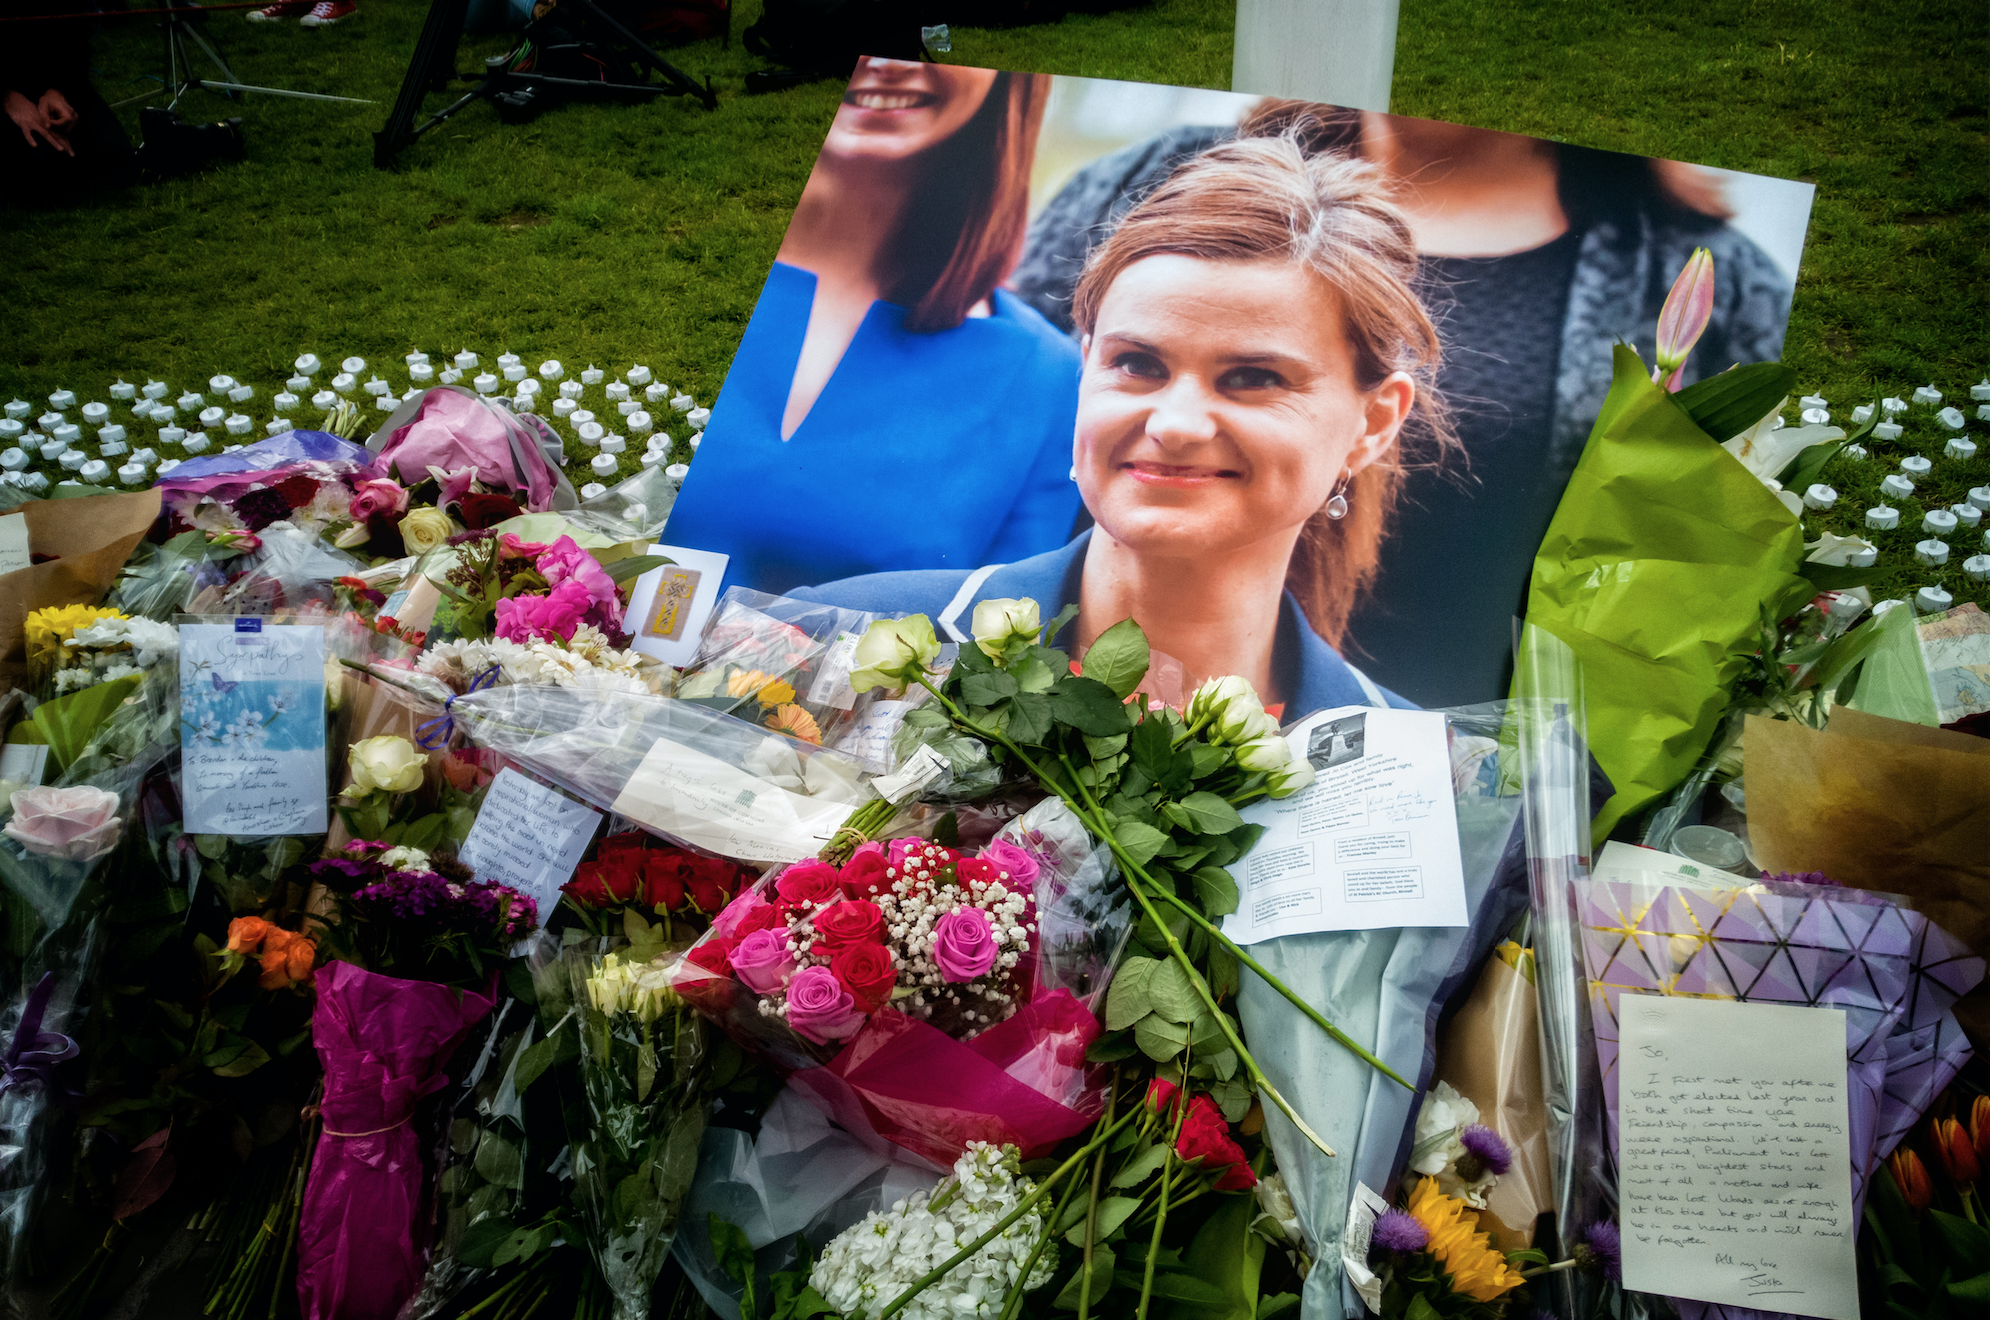 Flowers laid for Jo Cox MP at Parliament Square in London. Garry Knight, 17 June 2016 (CC0 license)